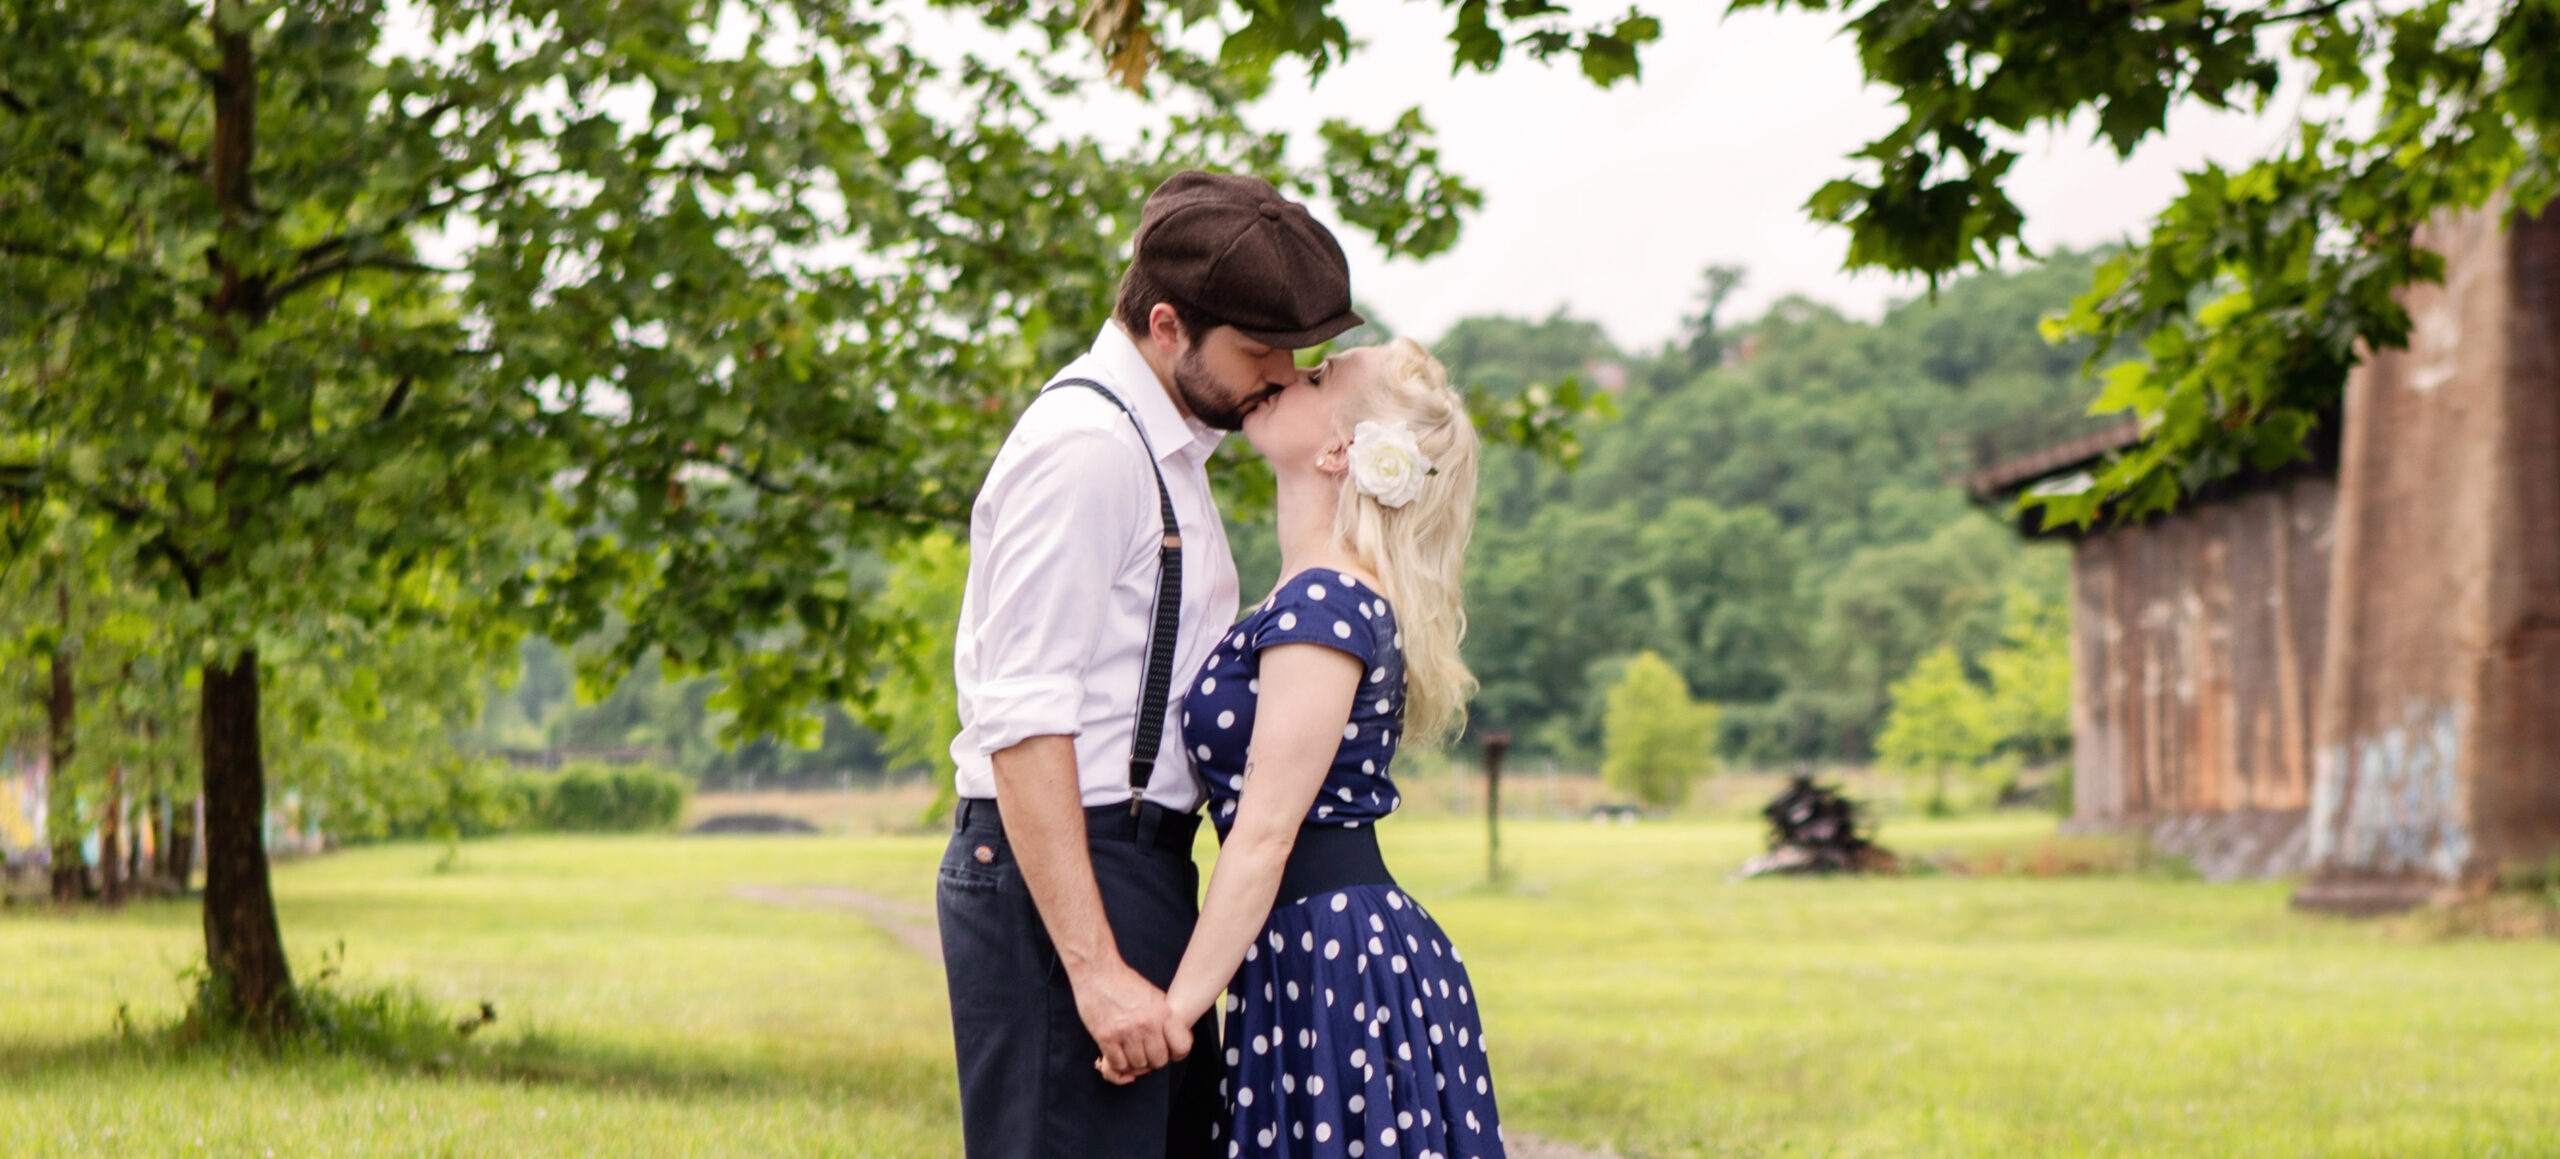 a man and woman are kissing in the grass